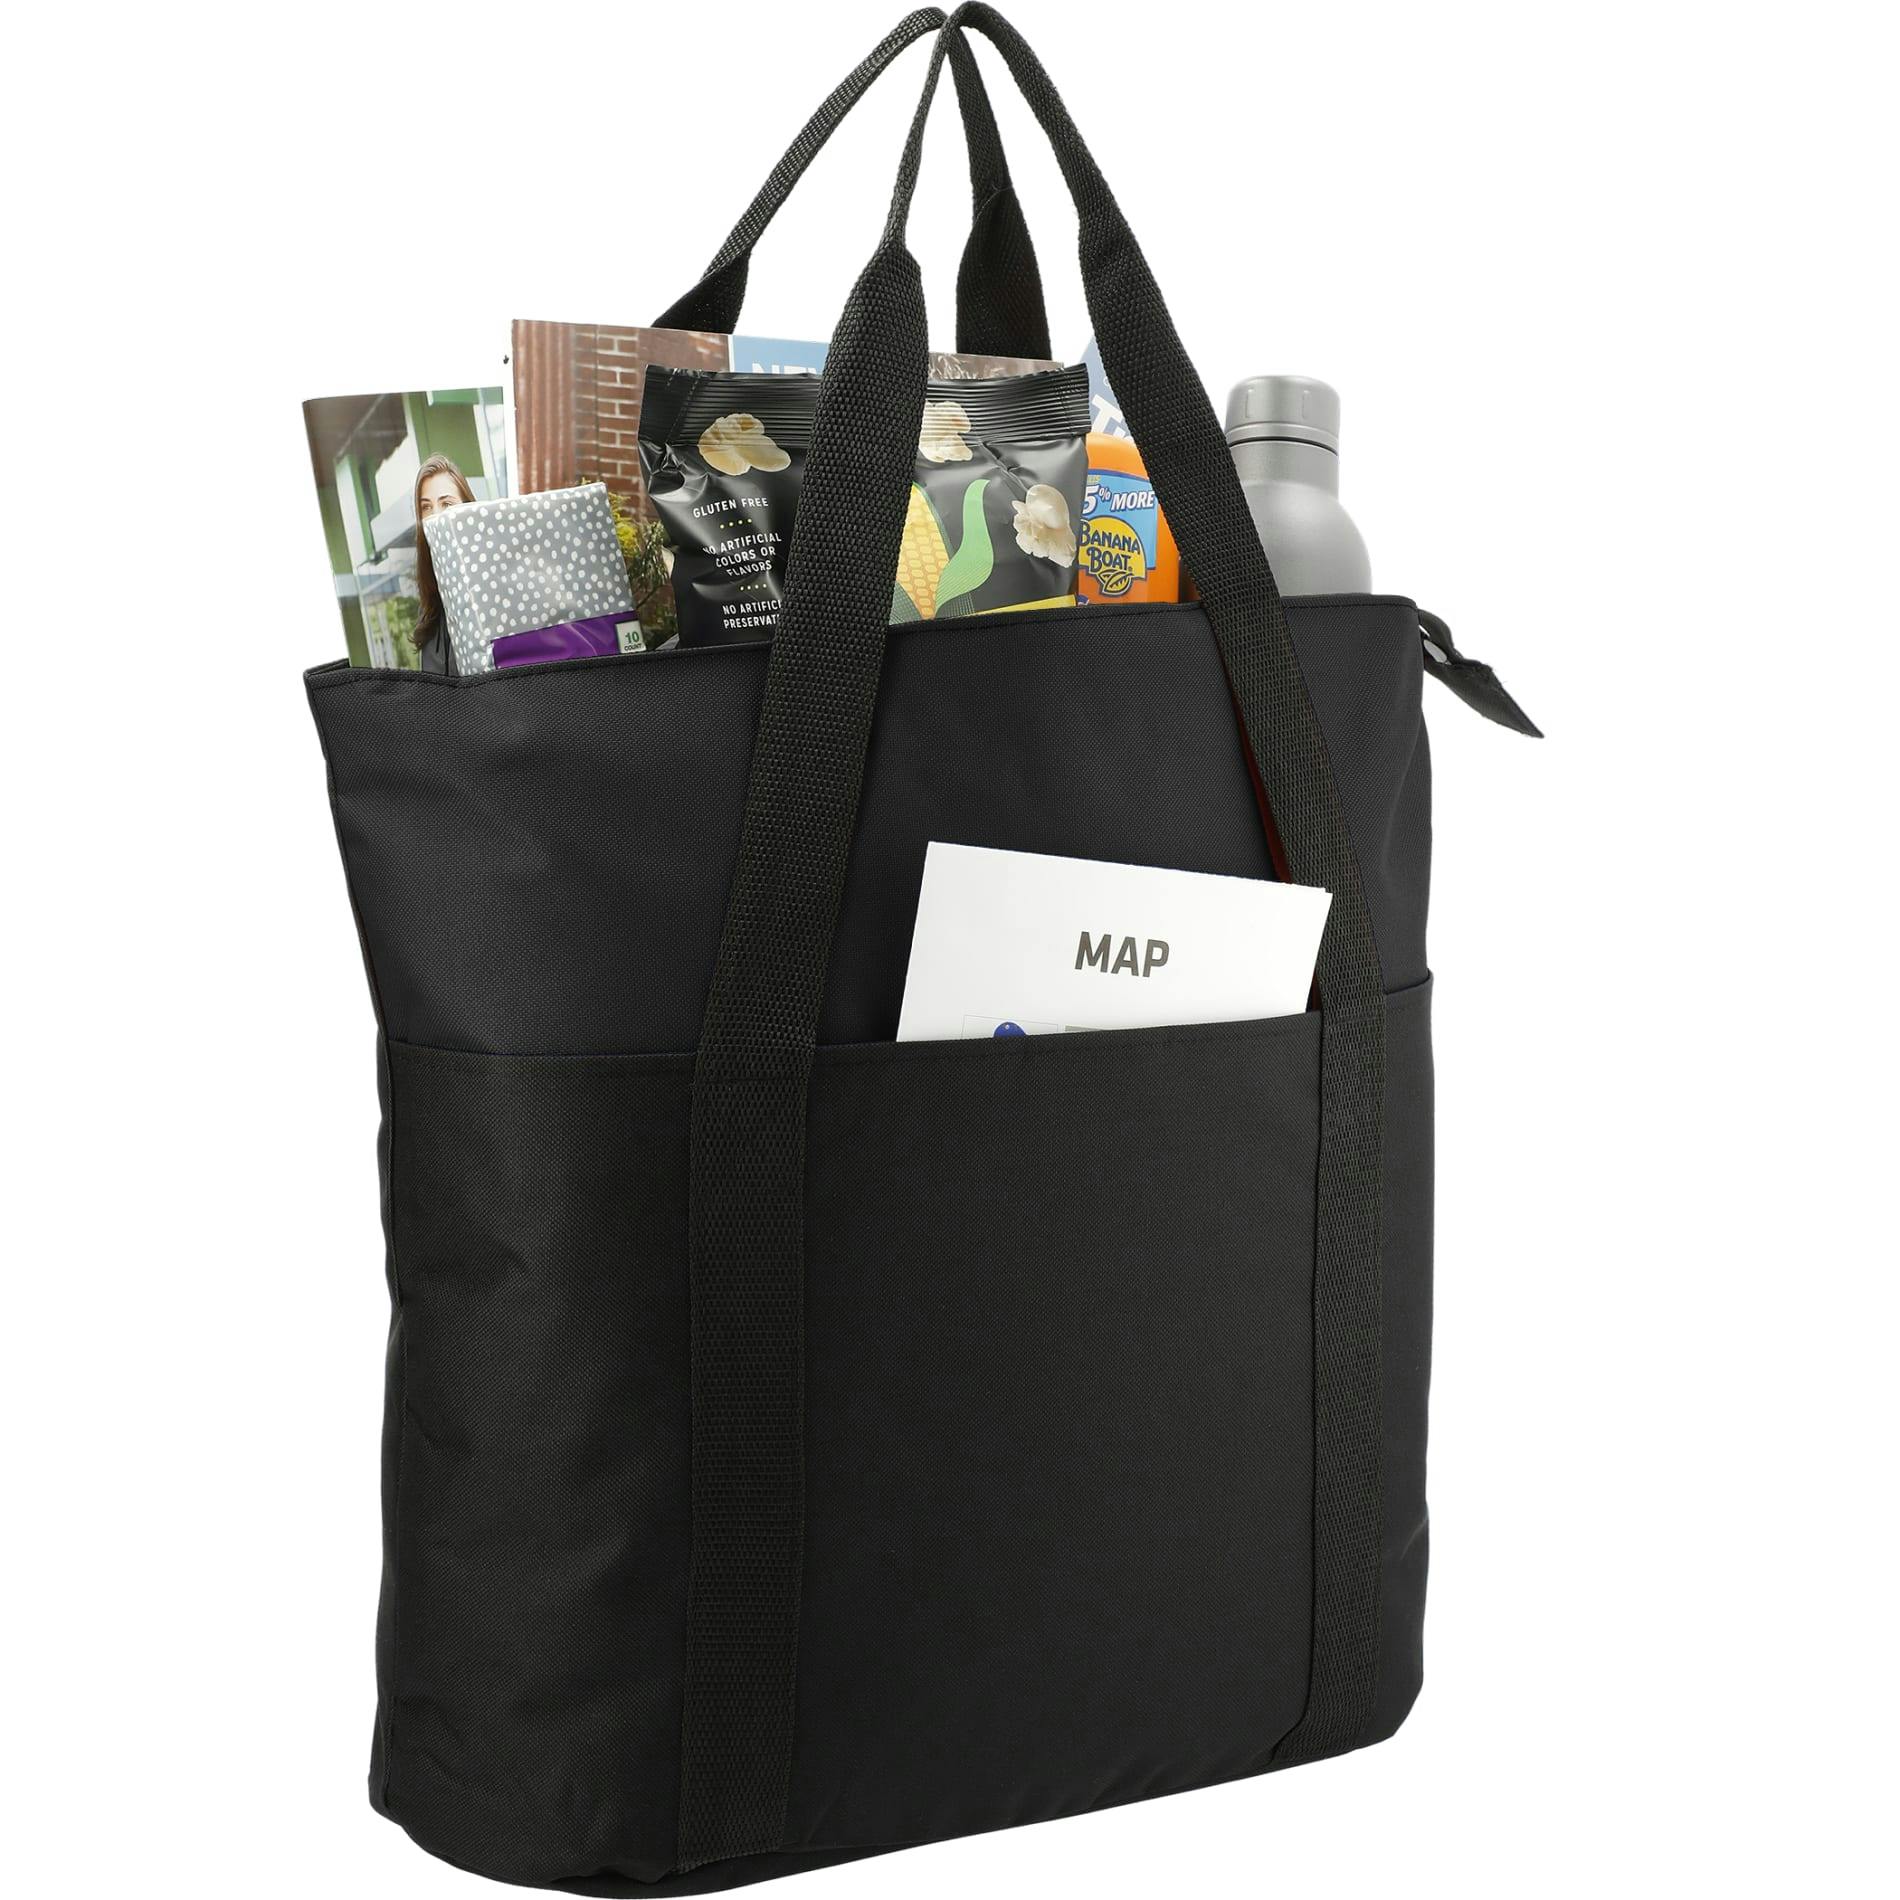 Heavy Duty Zippered Convention Tote - additional Image 1